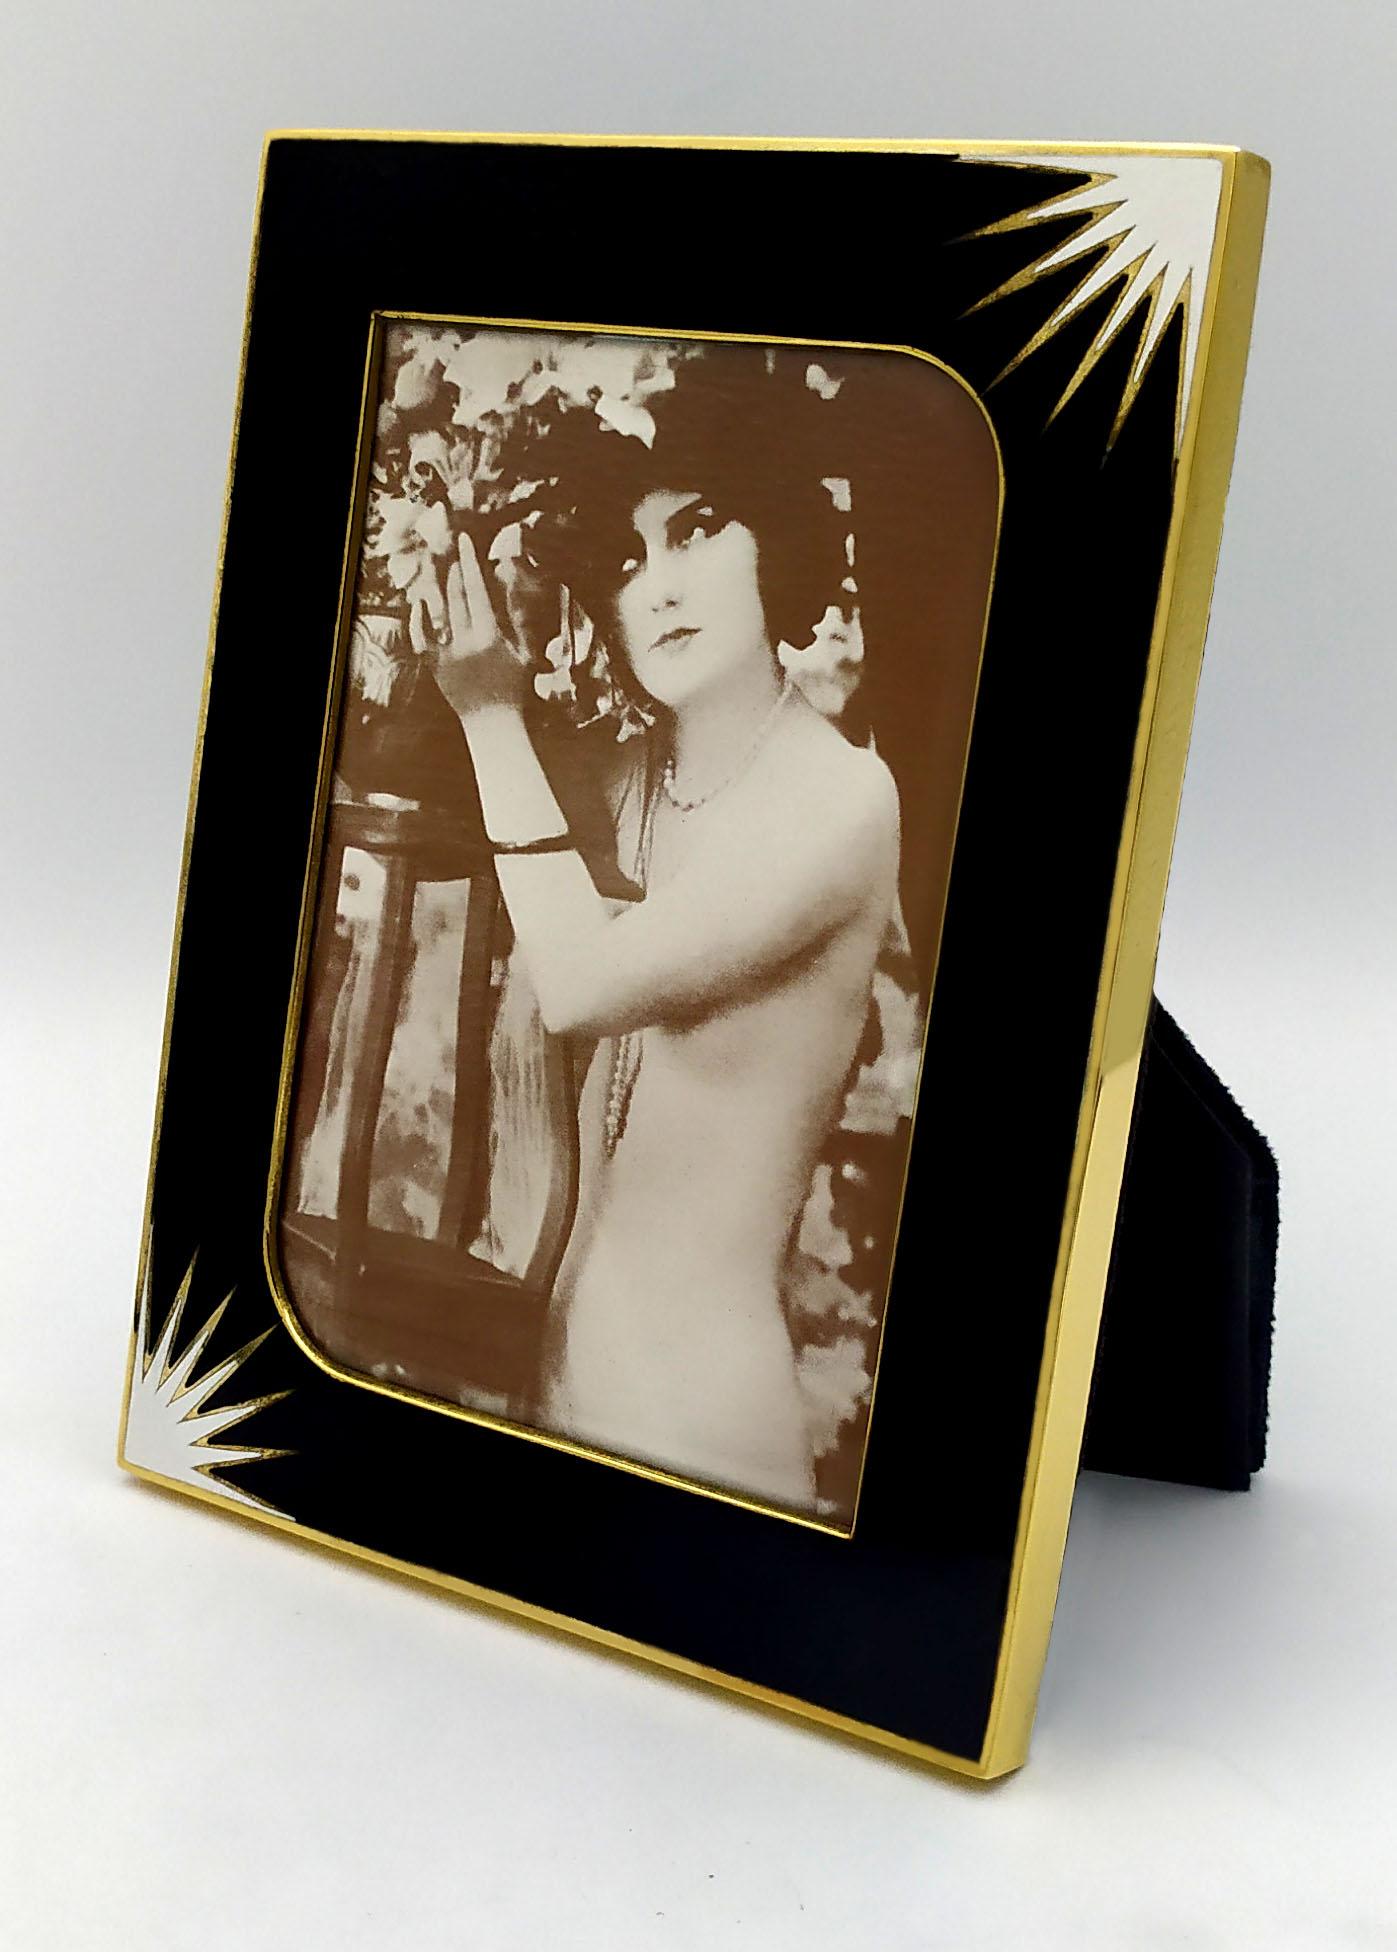 Black with white milk design Rectangular photo frame in 800/1000 silver gold plated with fire enamels. External cm. 13.4 x 17.4 Internal cm. 9 x 13. Weight gr. 199. Created in Art Deco style for Cartier USA in the 1980s, inspired by drawings by